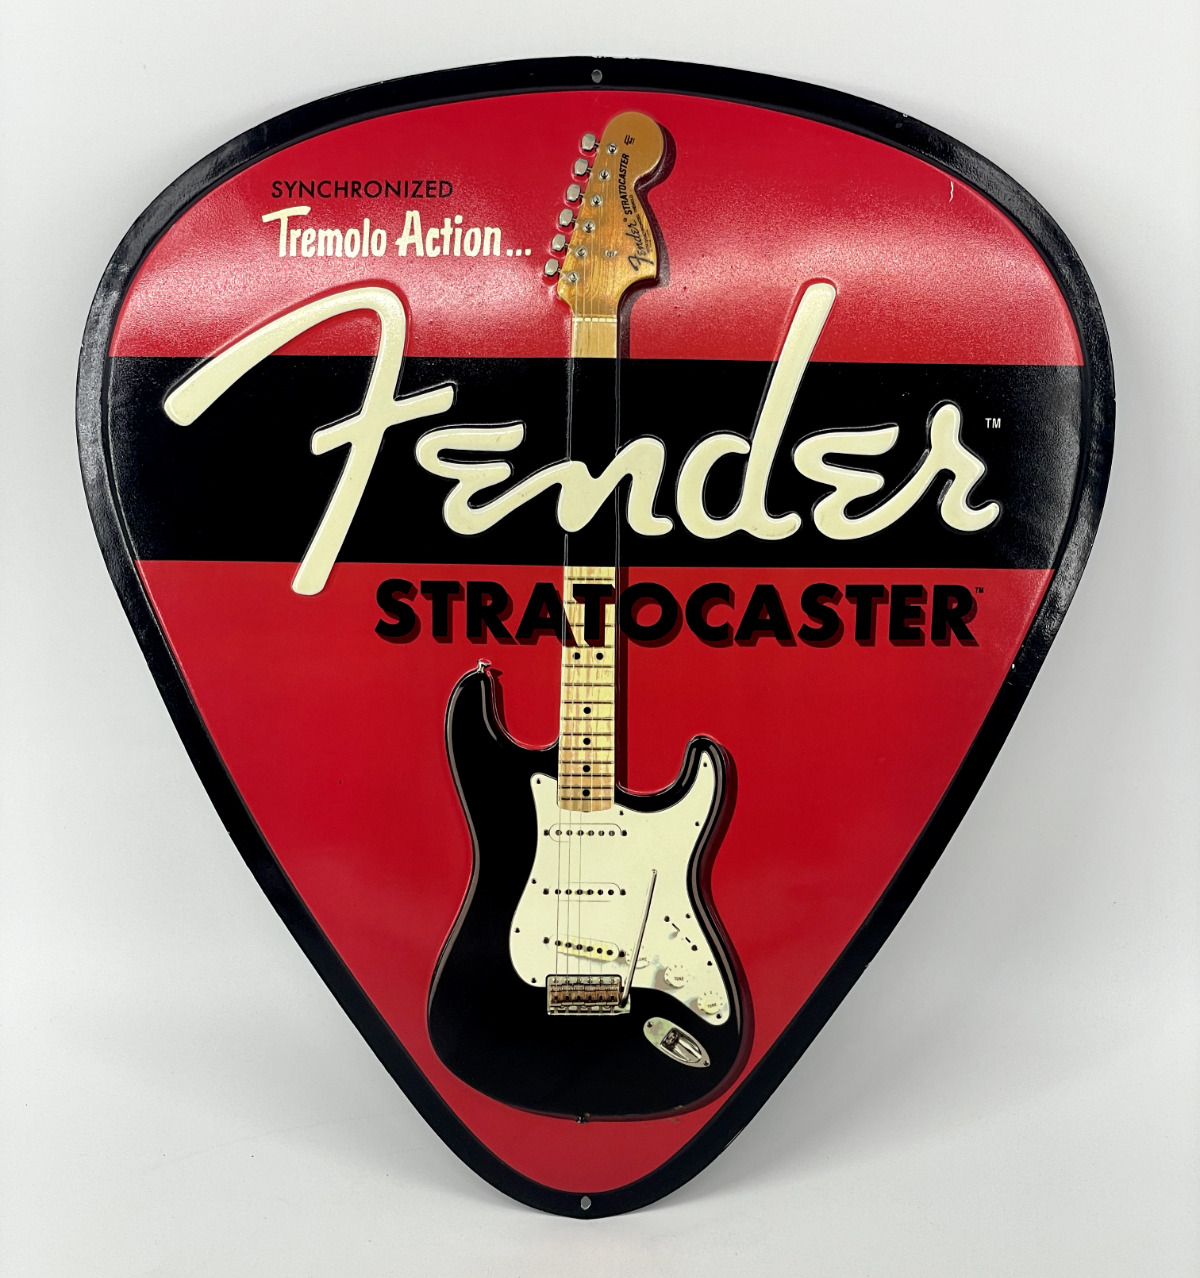 Fender Stratocaster Synchronized Tremolo Action Guitar Pick Metal Sign